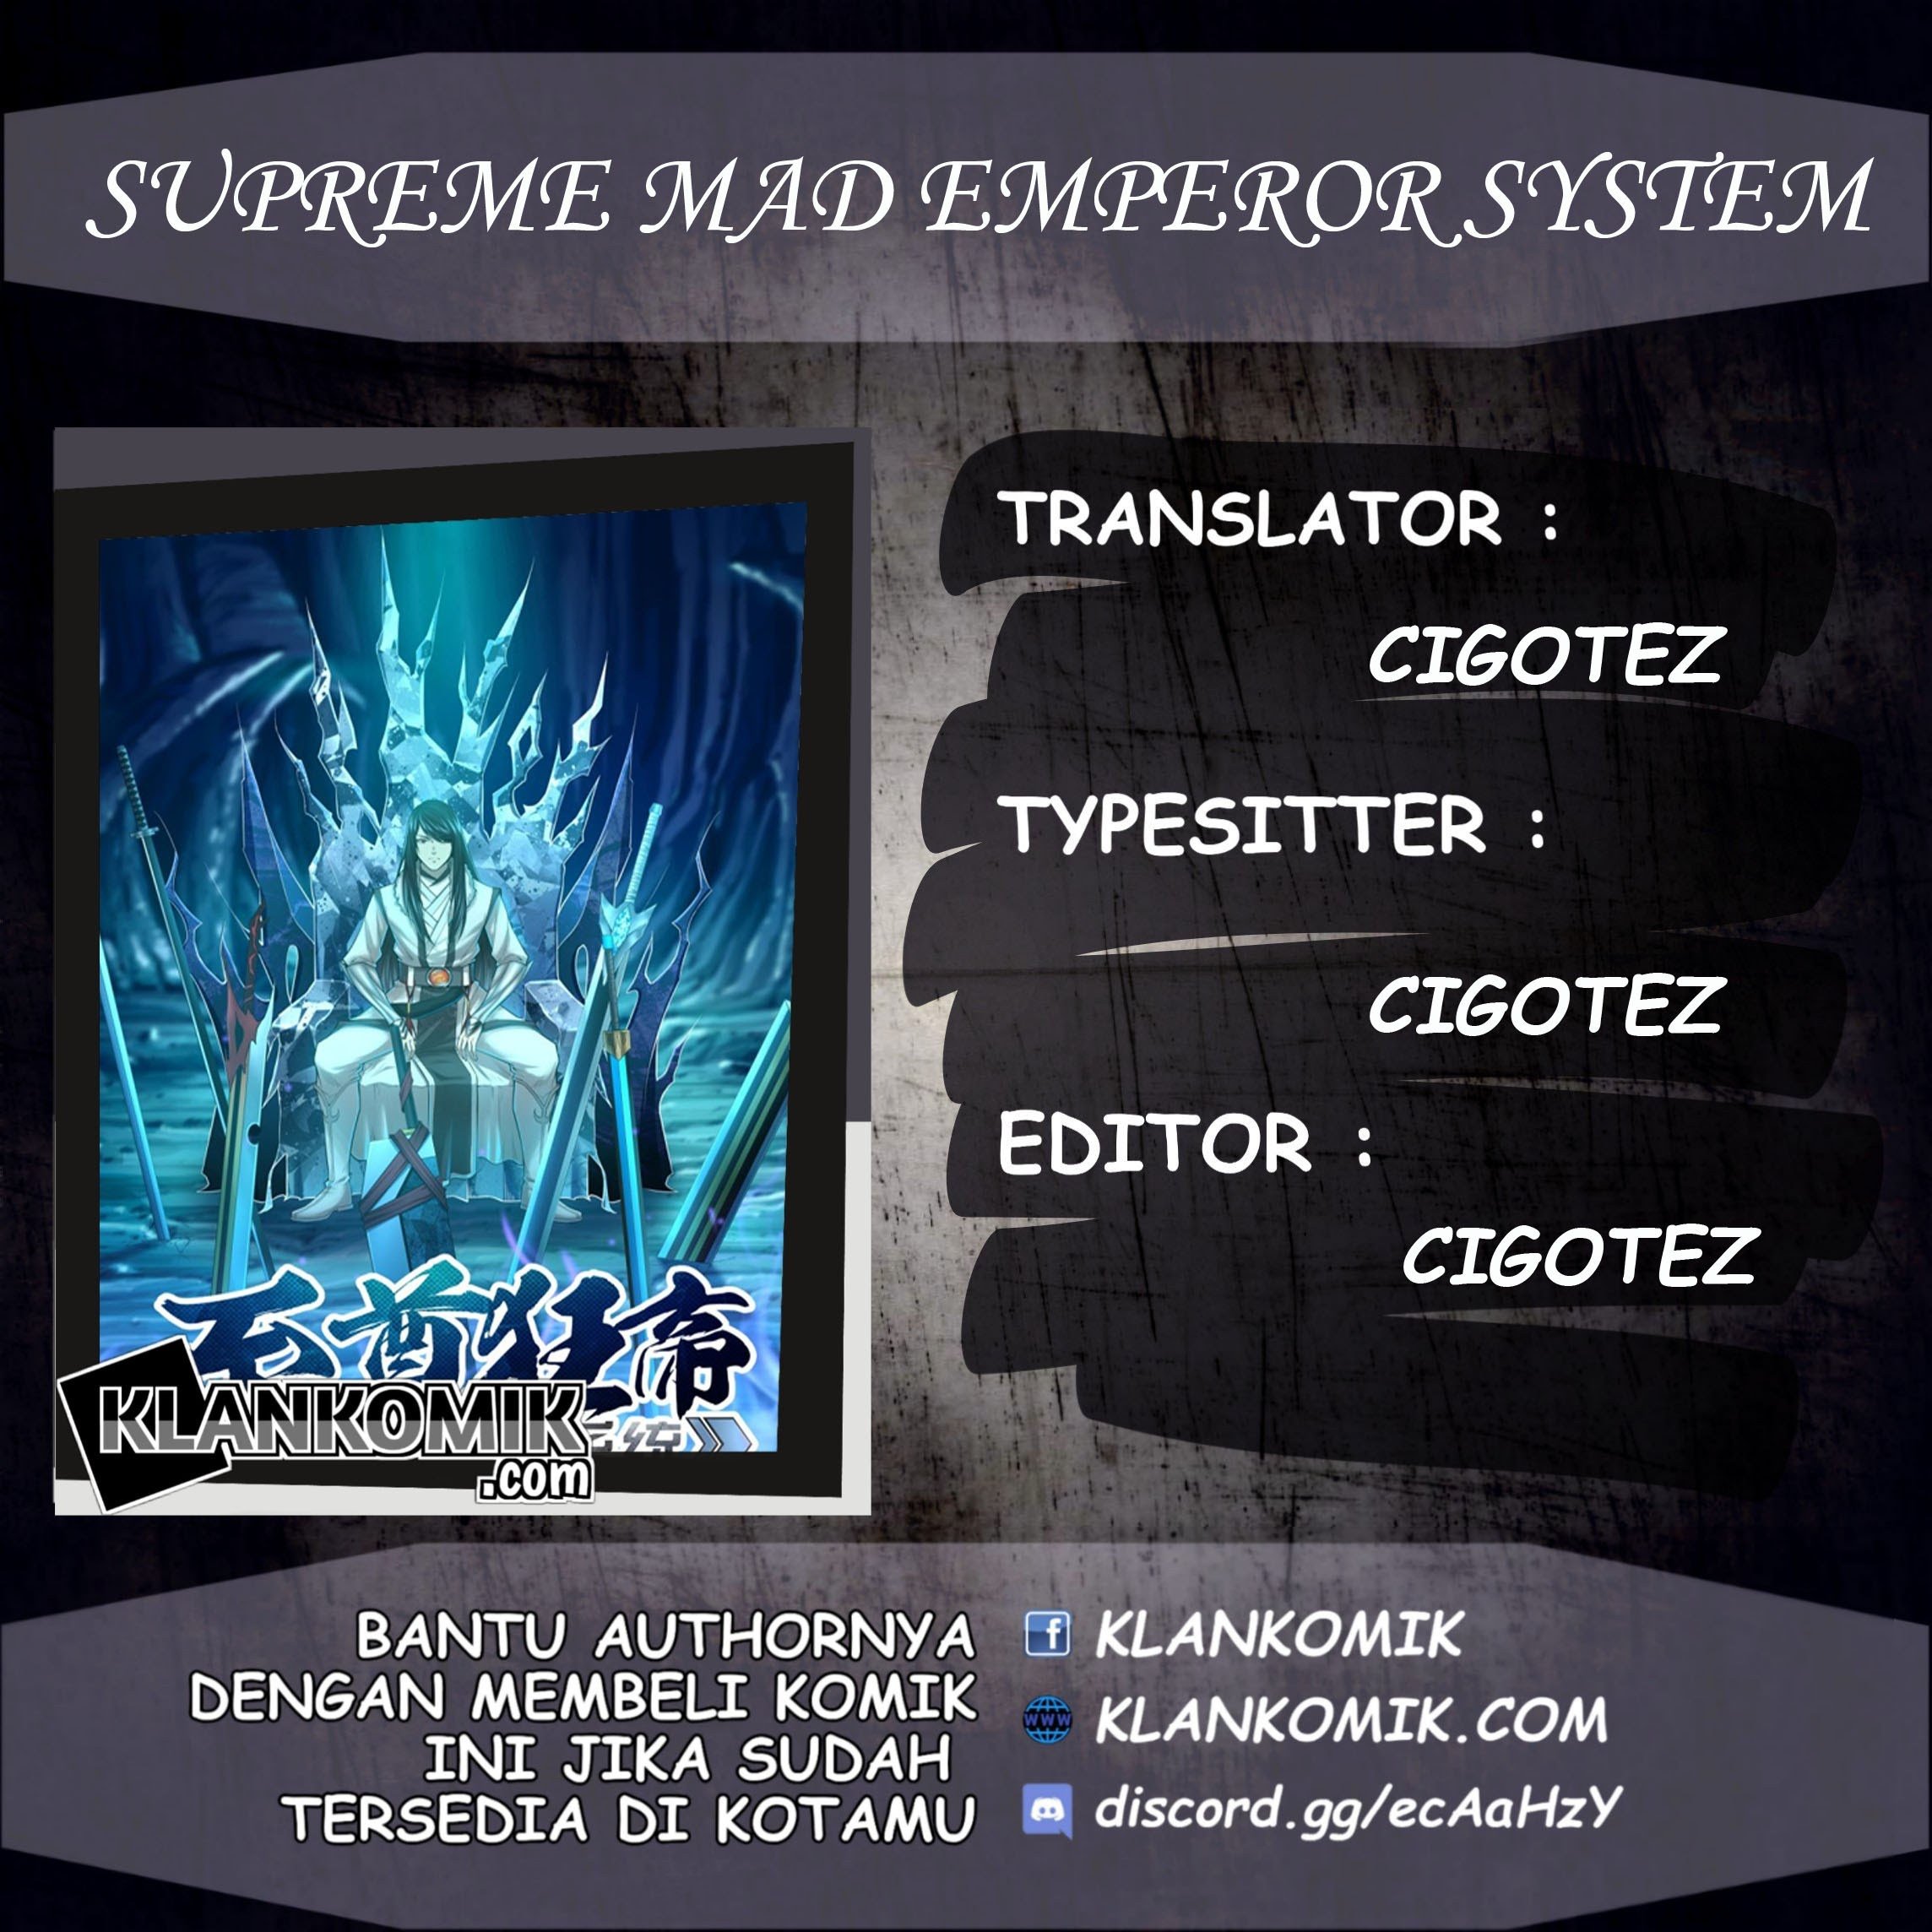 Extreme Mad Emperor System (Supreme Mad Emperor System) Chapter 13